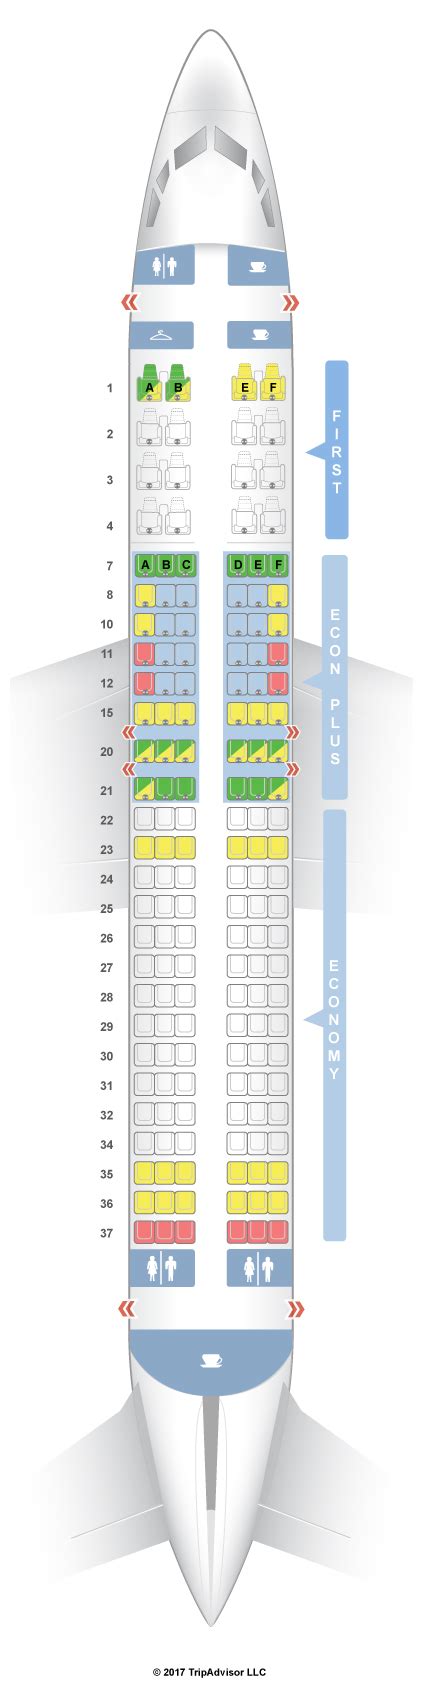 boeing 737-800 seat map united airlines